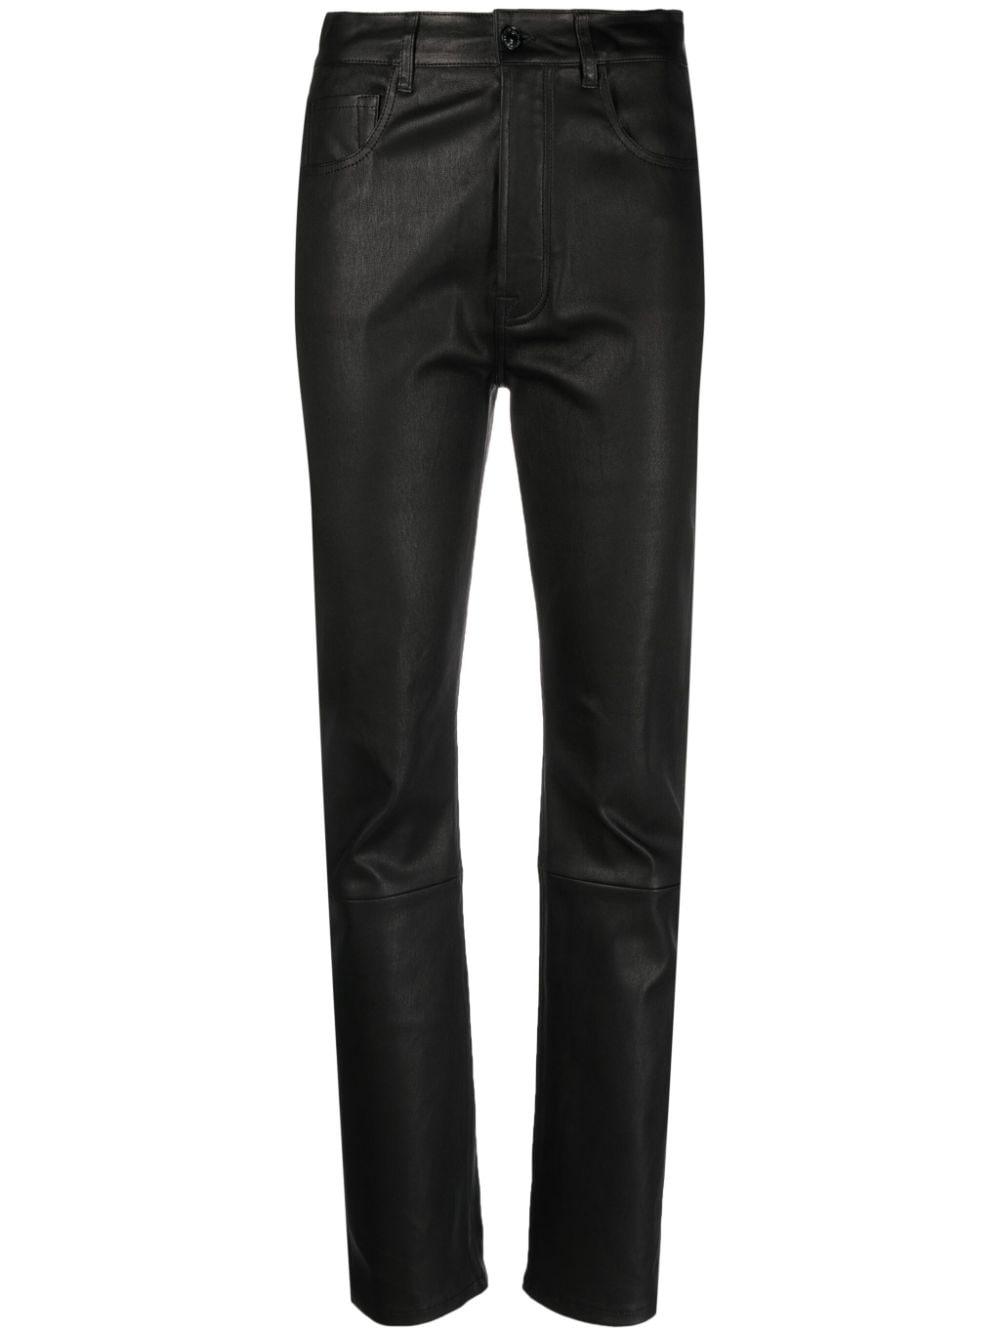 7 For All Mankind Slim Fit Leather Trousers in Black | Lyst UK